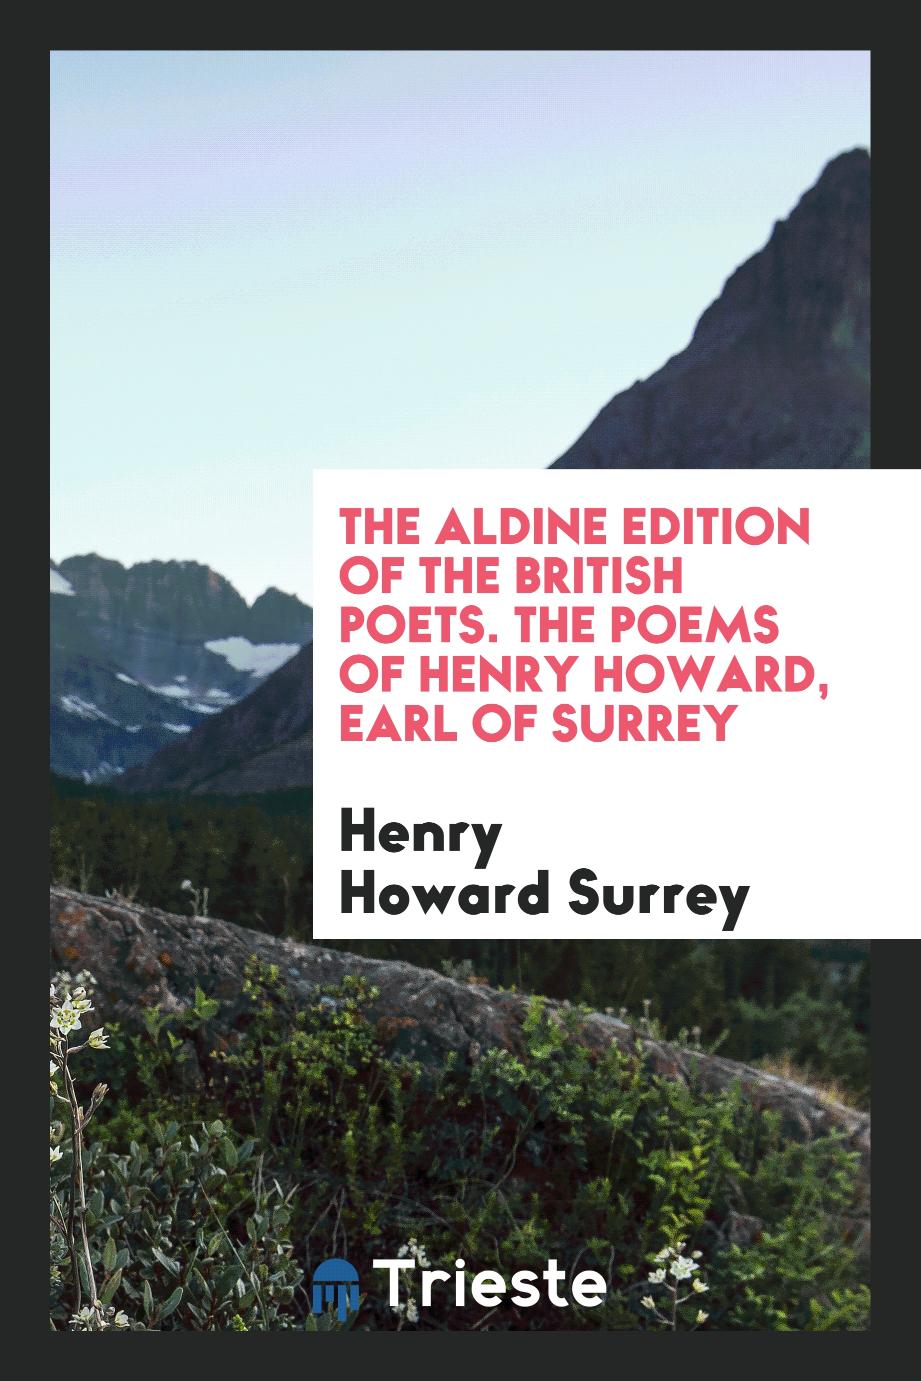 The Aldine Edition of the British Poets. The Poems of Henry Howard, Earl of Surrey